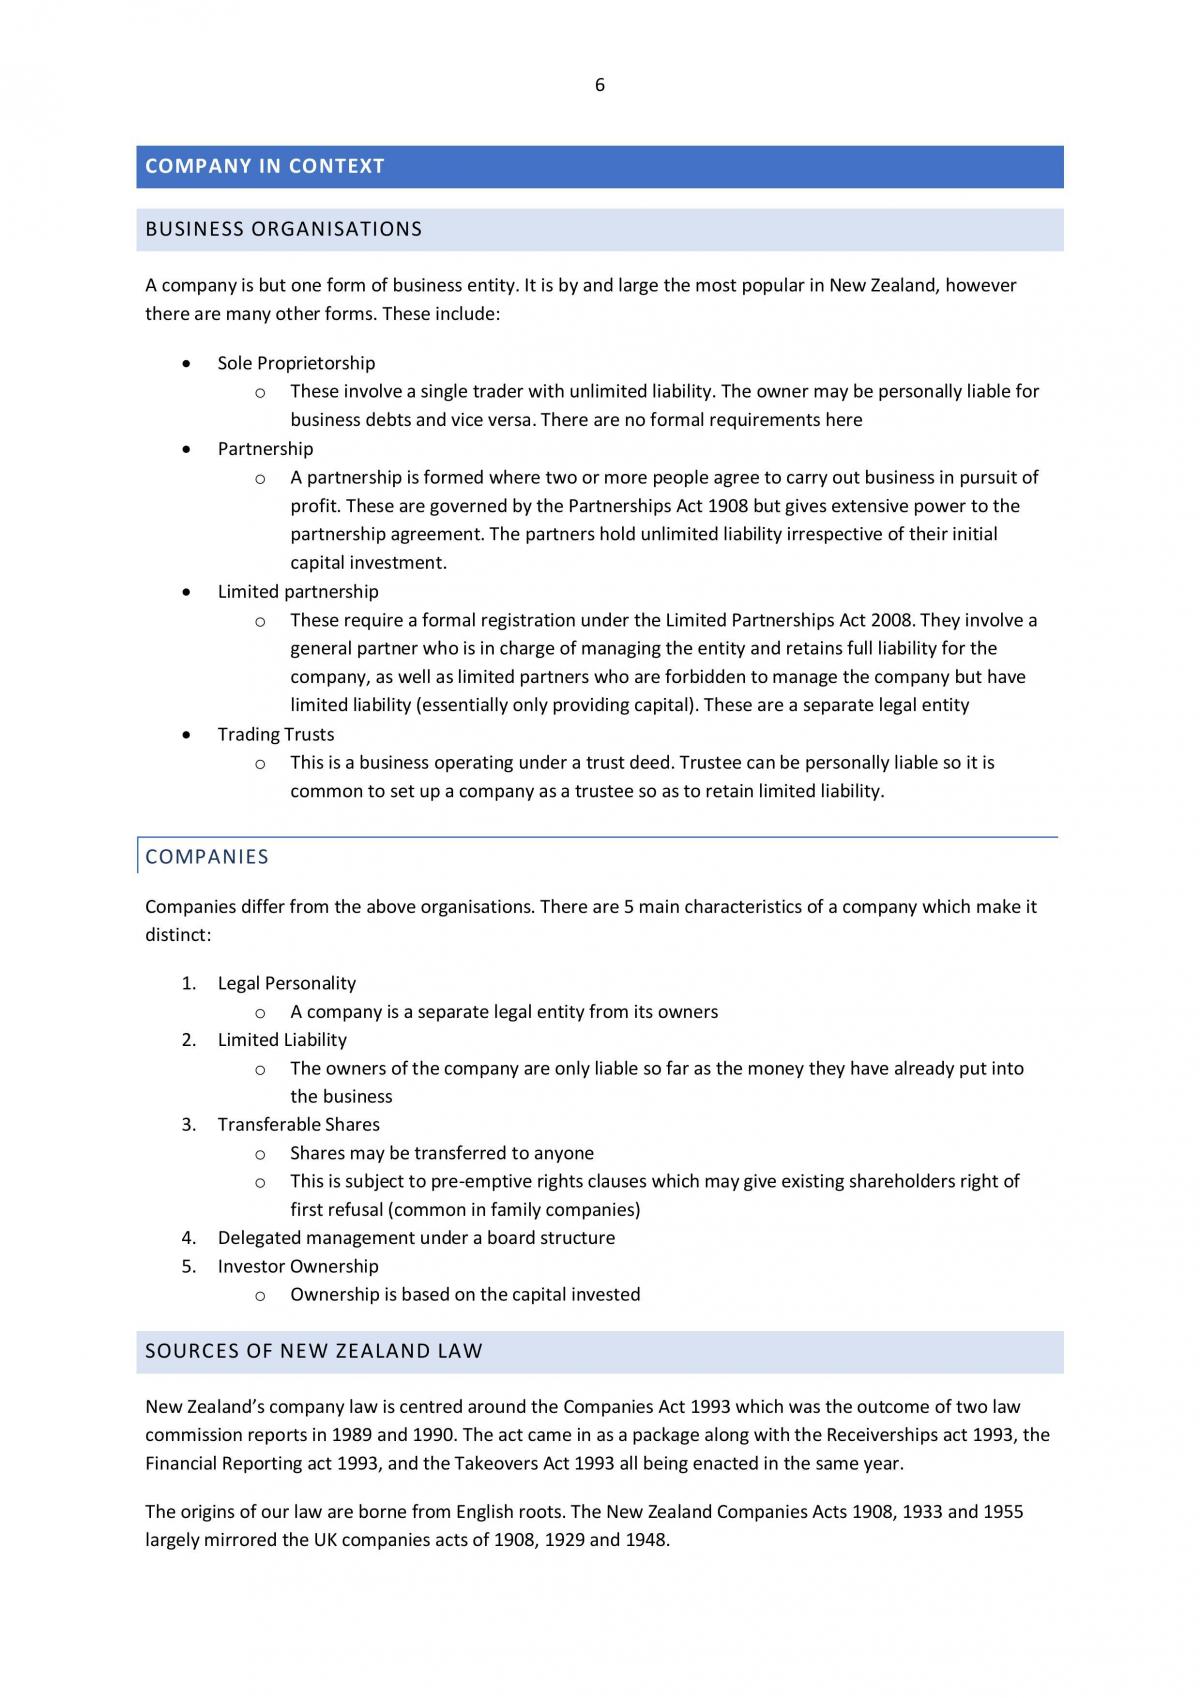 Company Law complete notes - Page 7